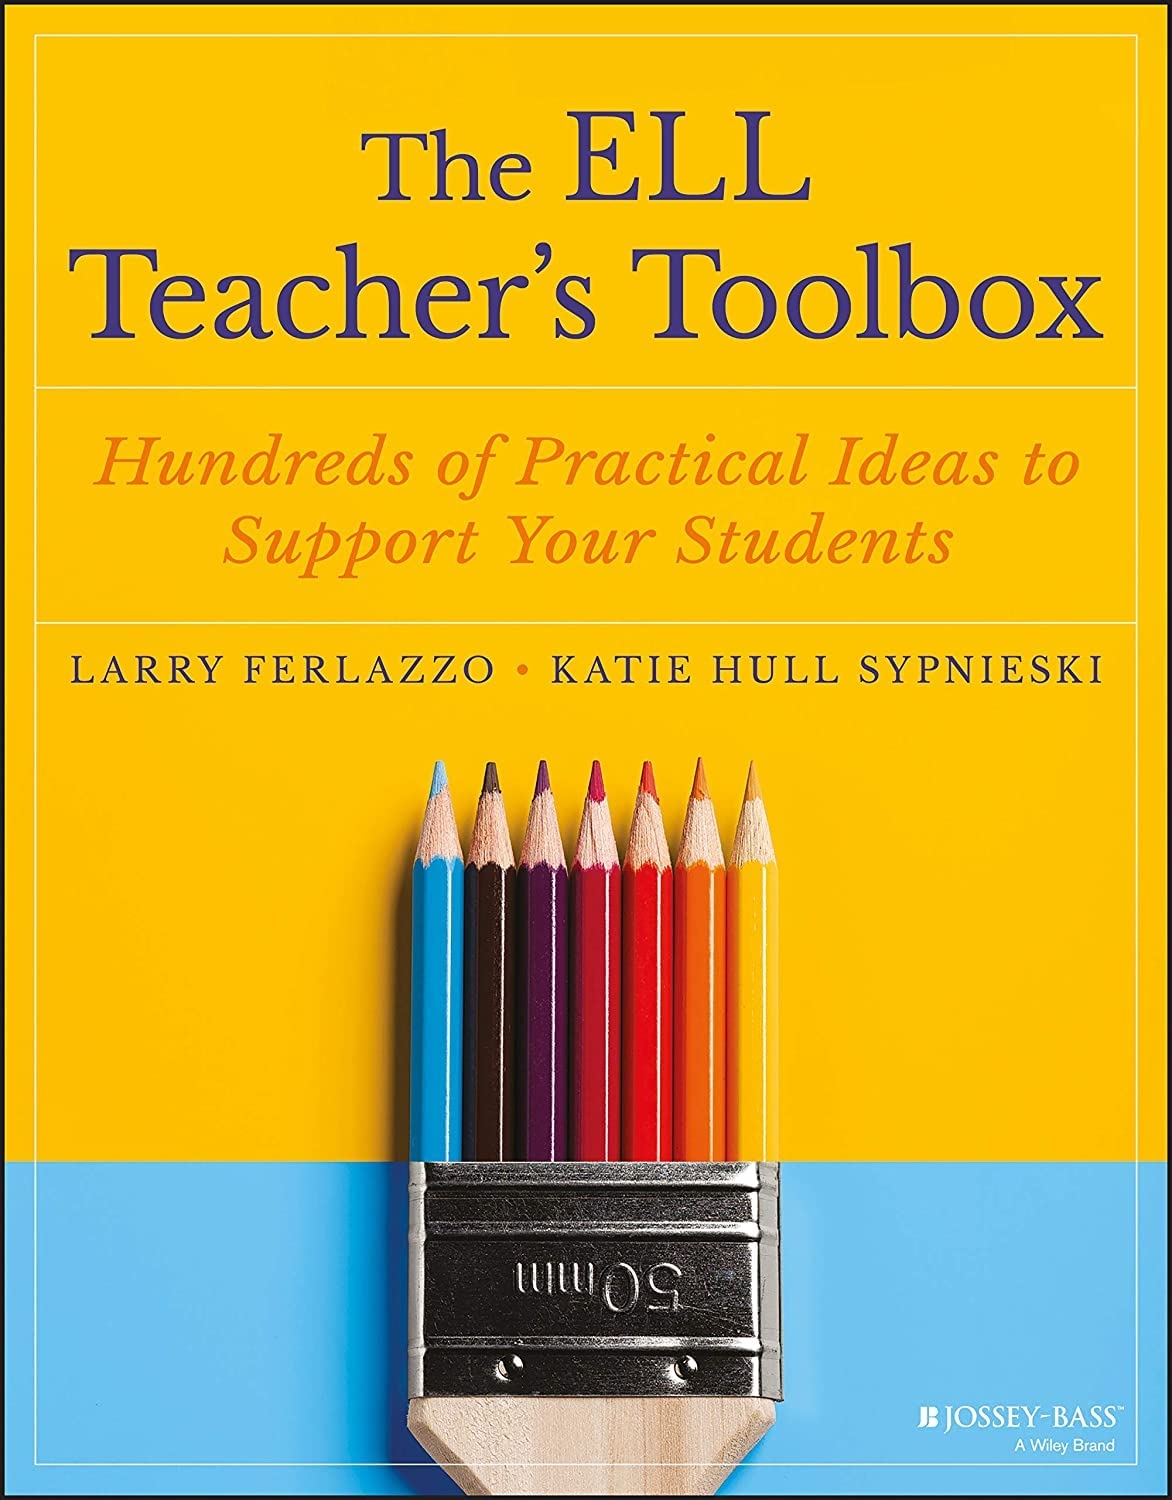 The ELL Teacher’s Toolbox: Hundreds of Practical Ideas to Support Your Students (The Teacher’s Toolbox Series)